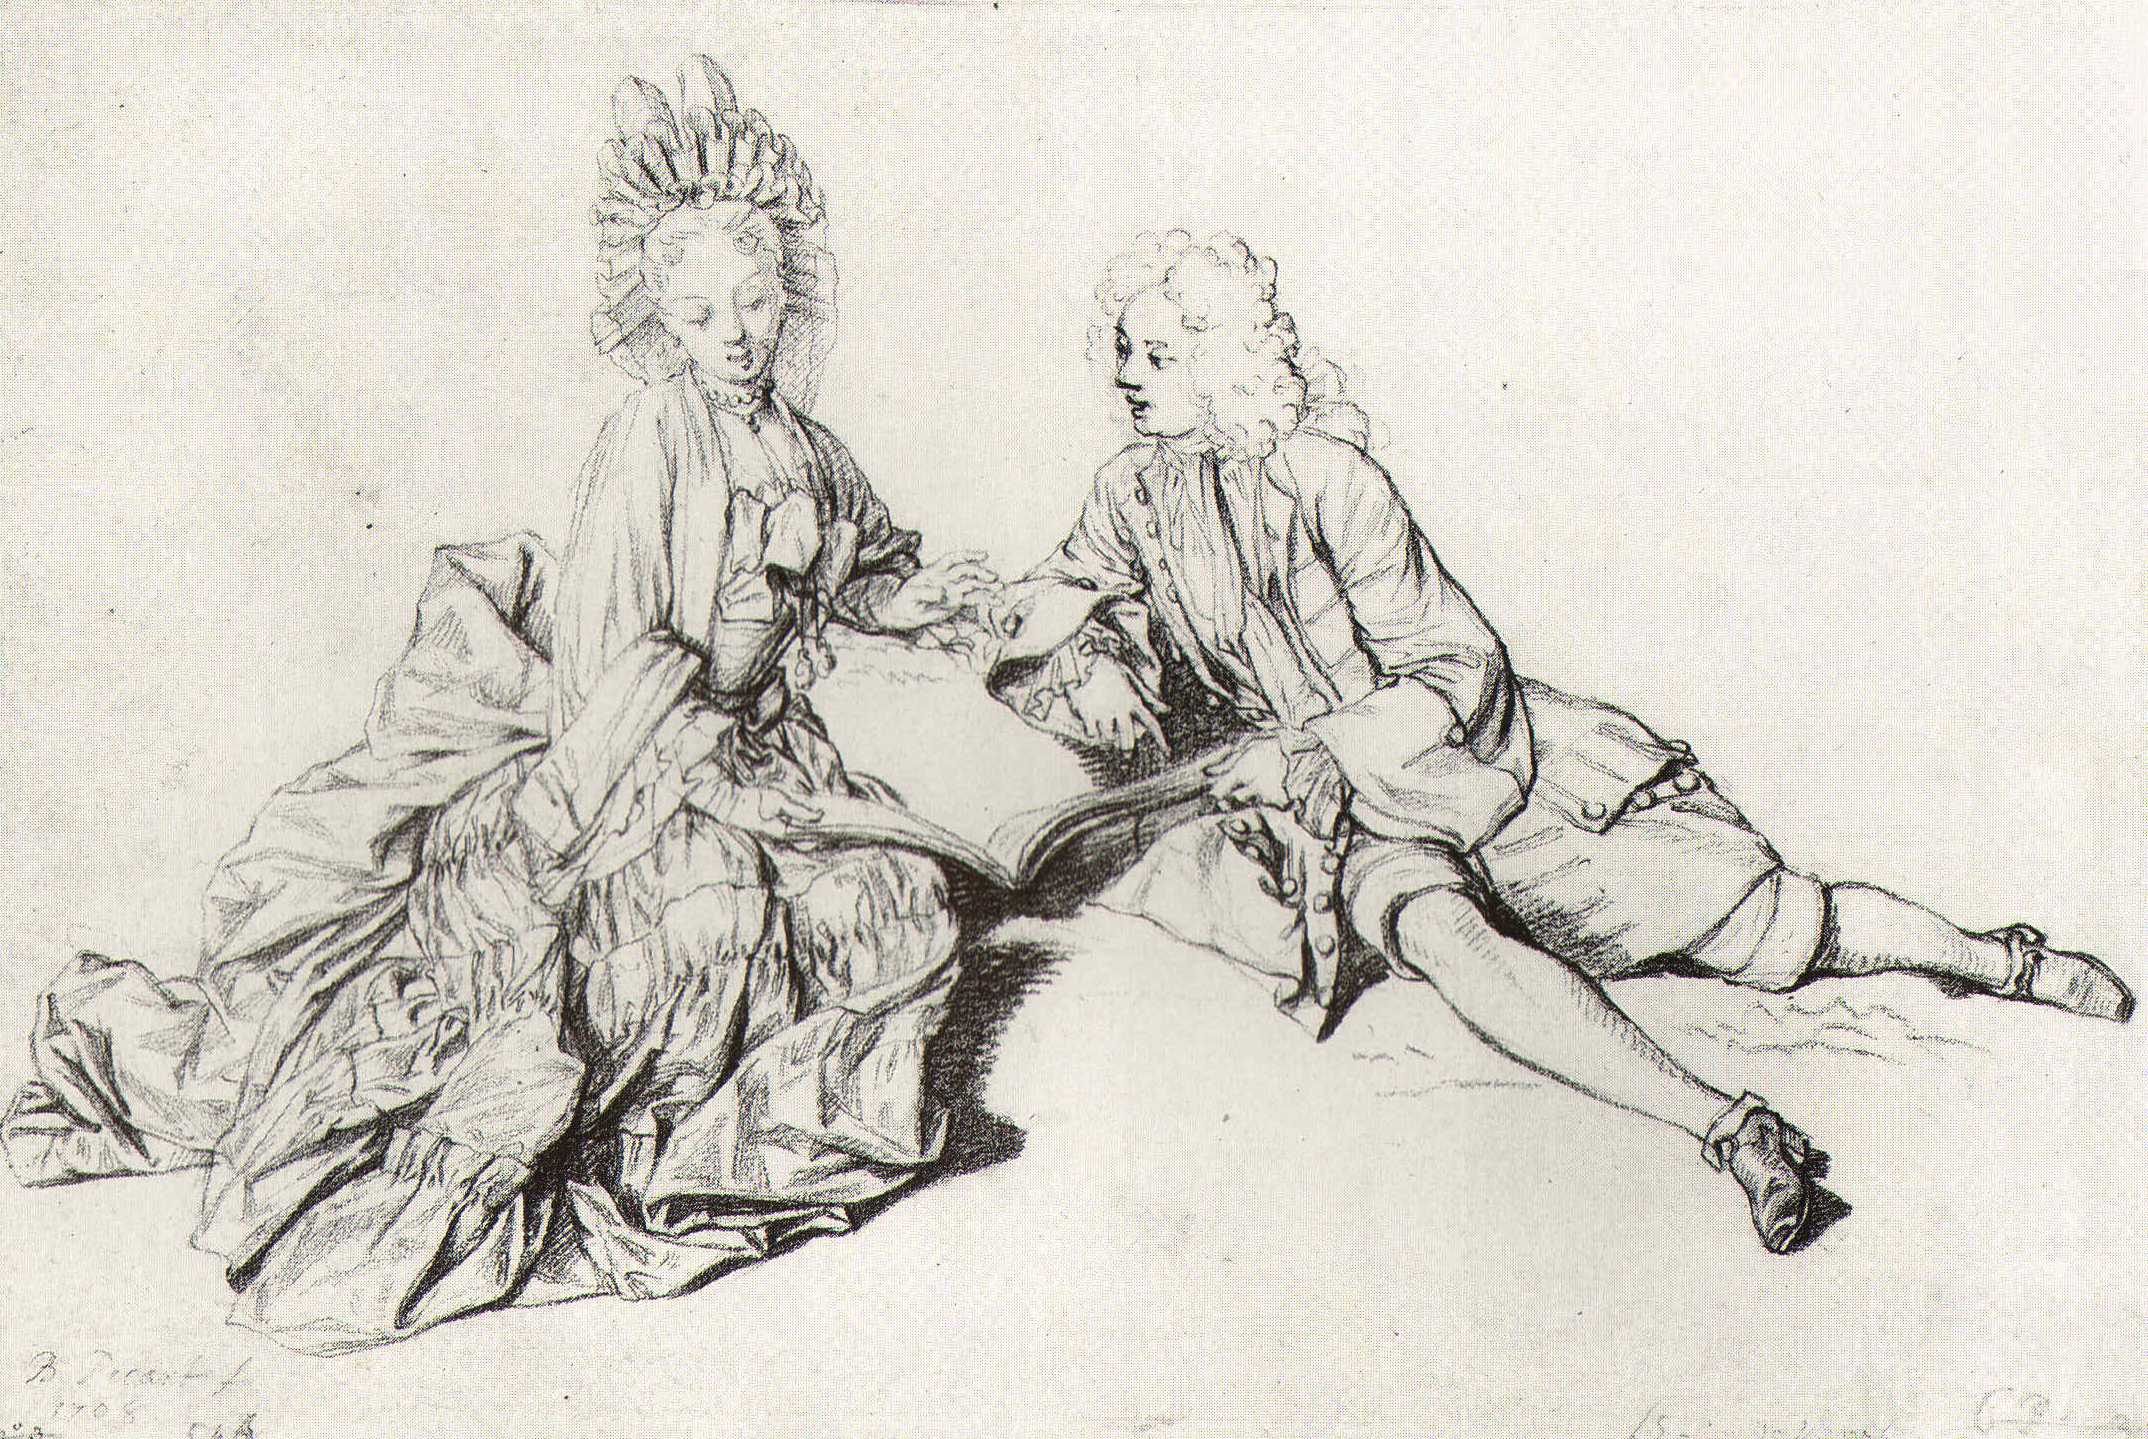 Picart, "Two figures for a fete galante," 1708